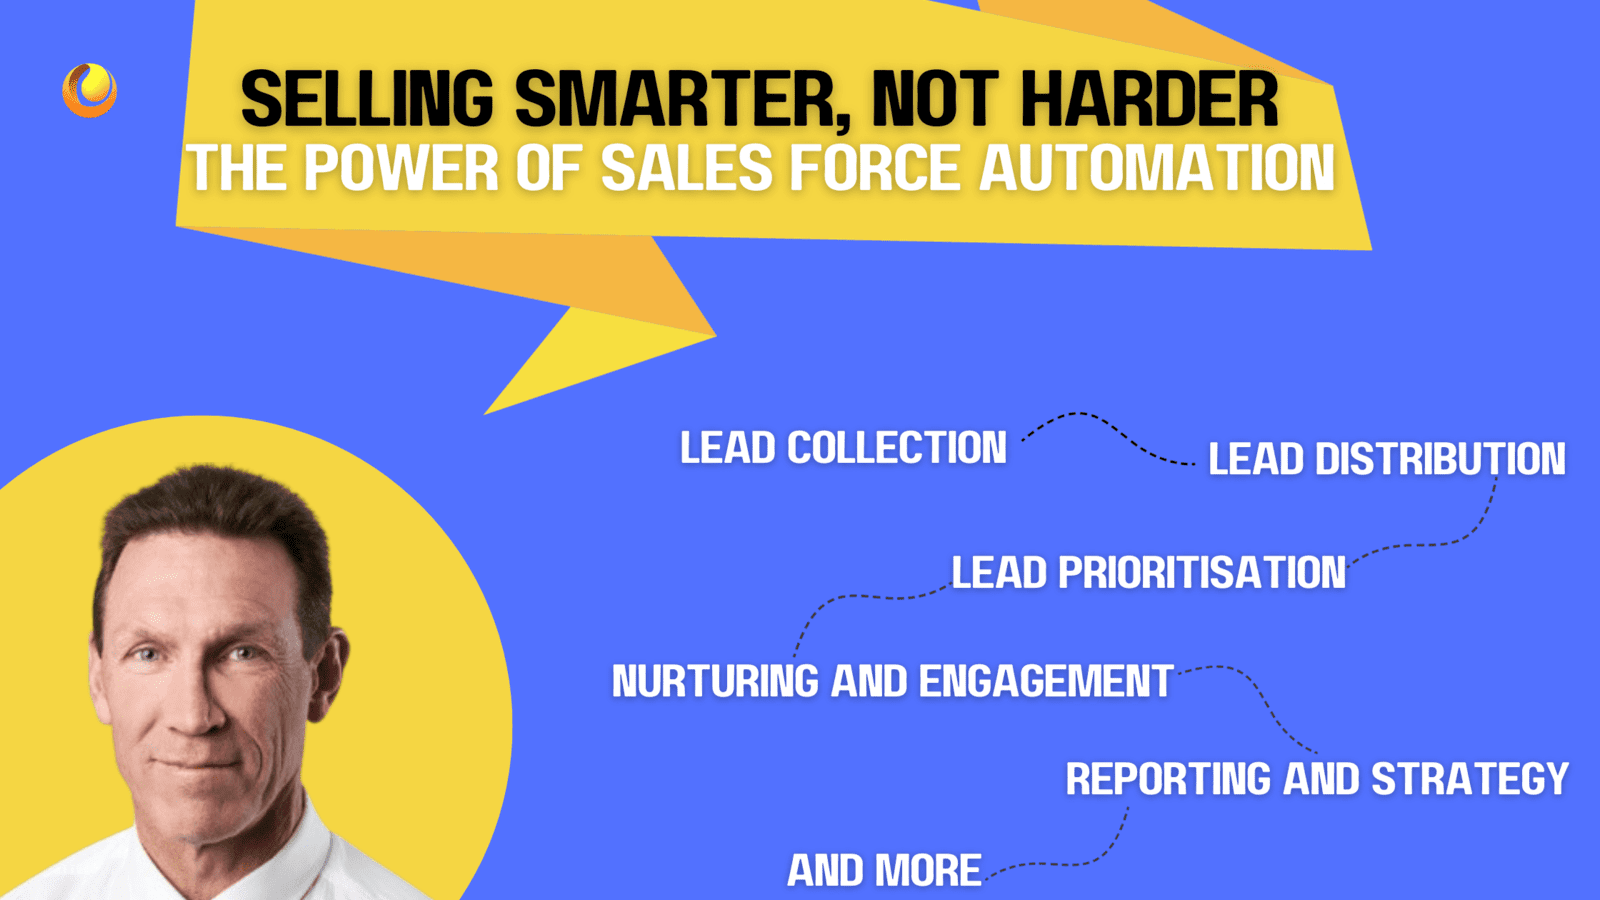 Selling Smarter, Not Harder: The Power of Sales Force Automation